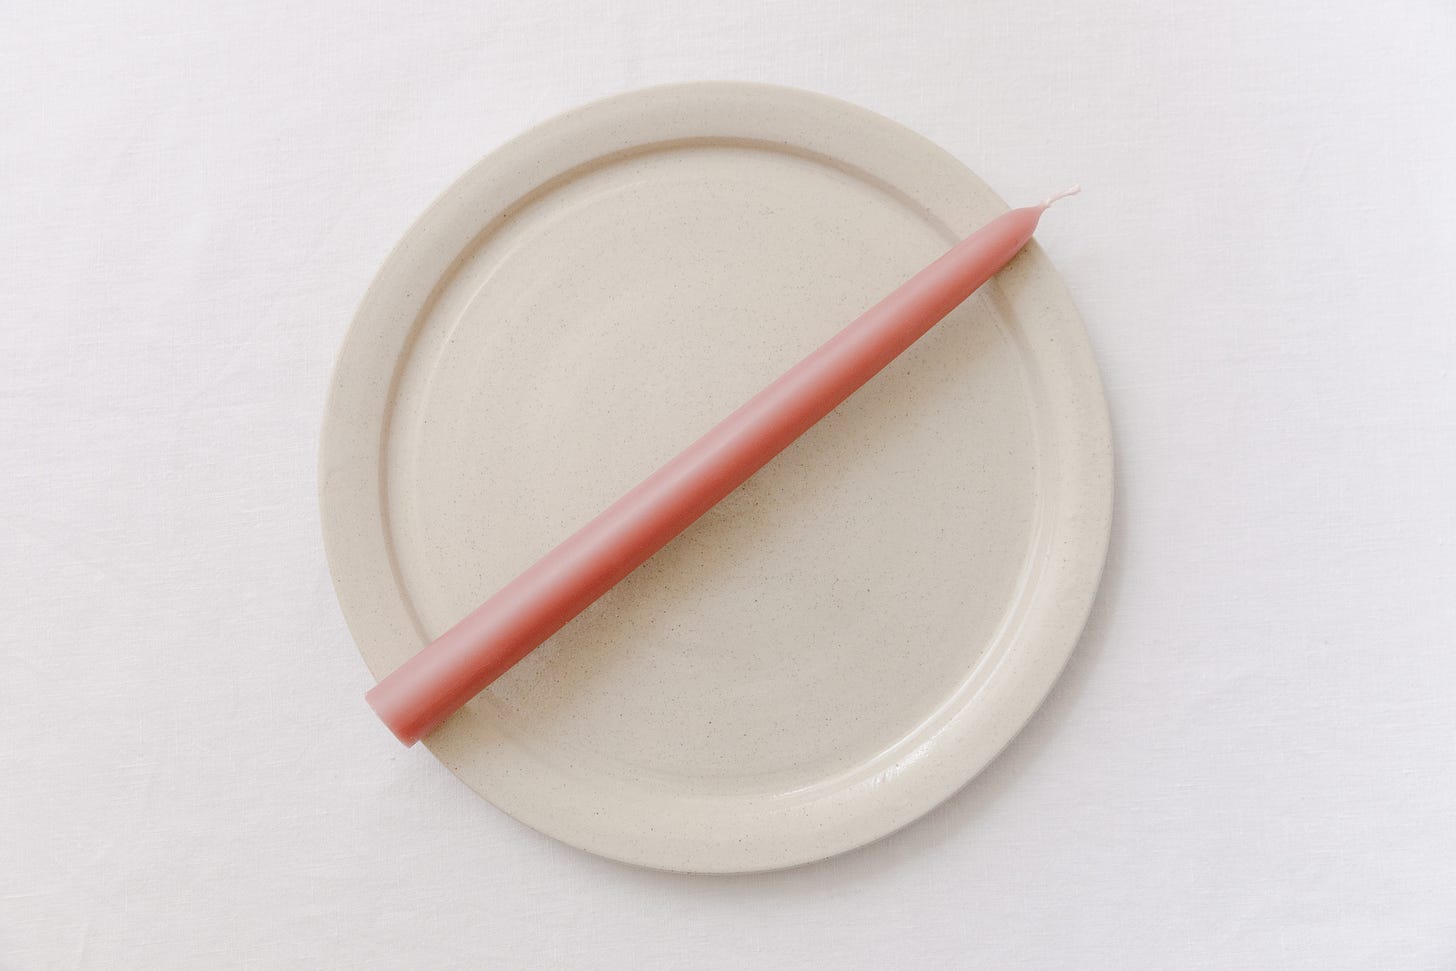 a dinner candle placed at an angle on a plate.